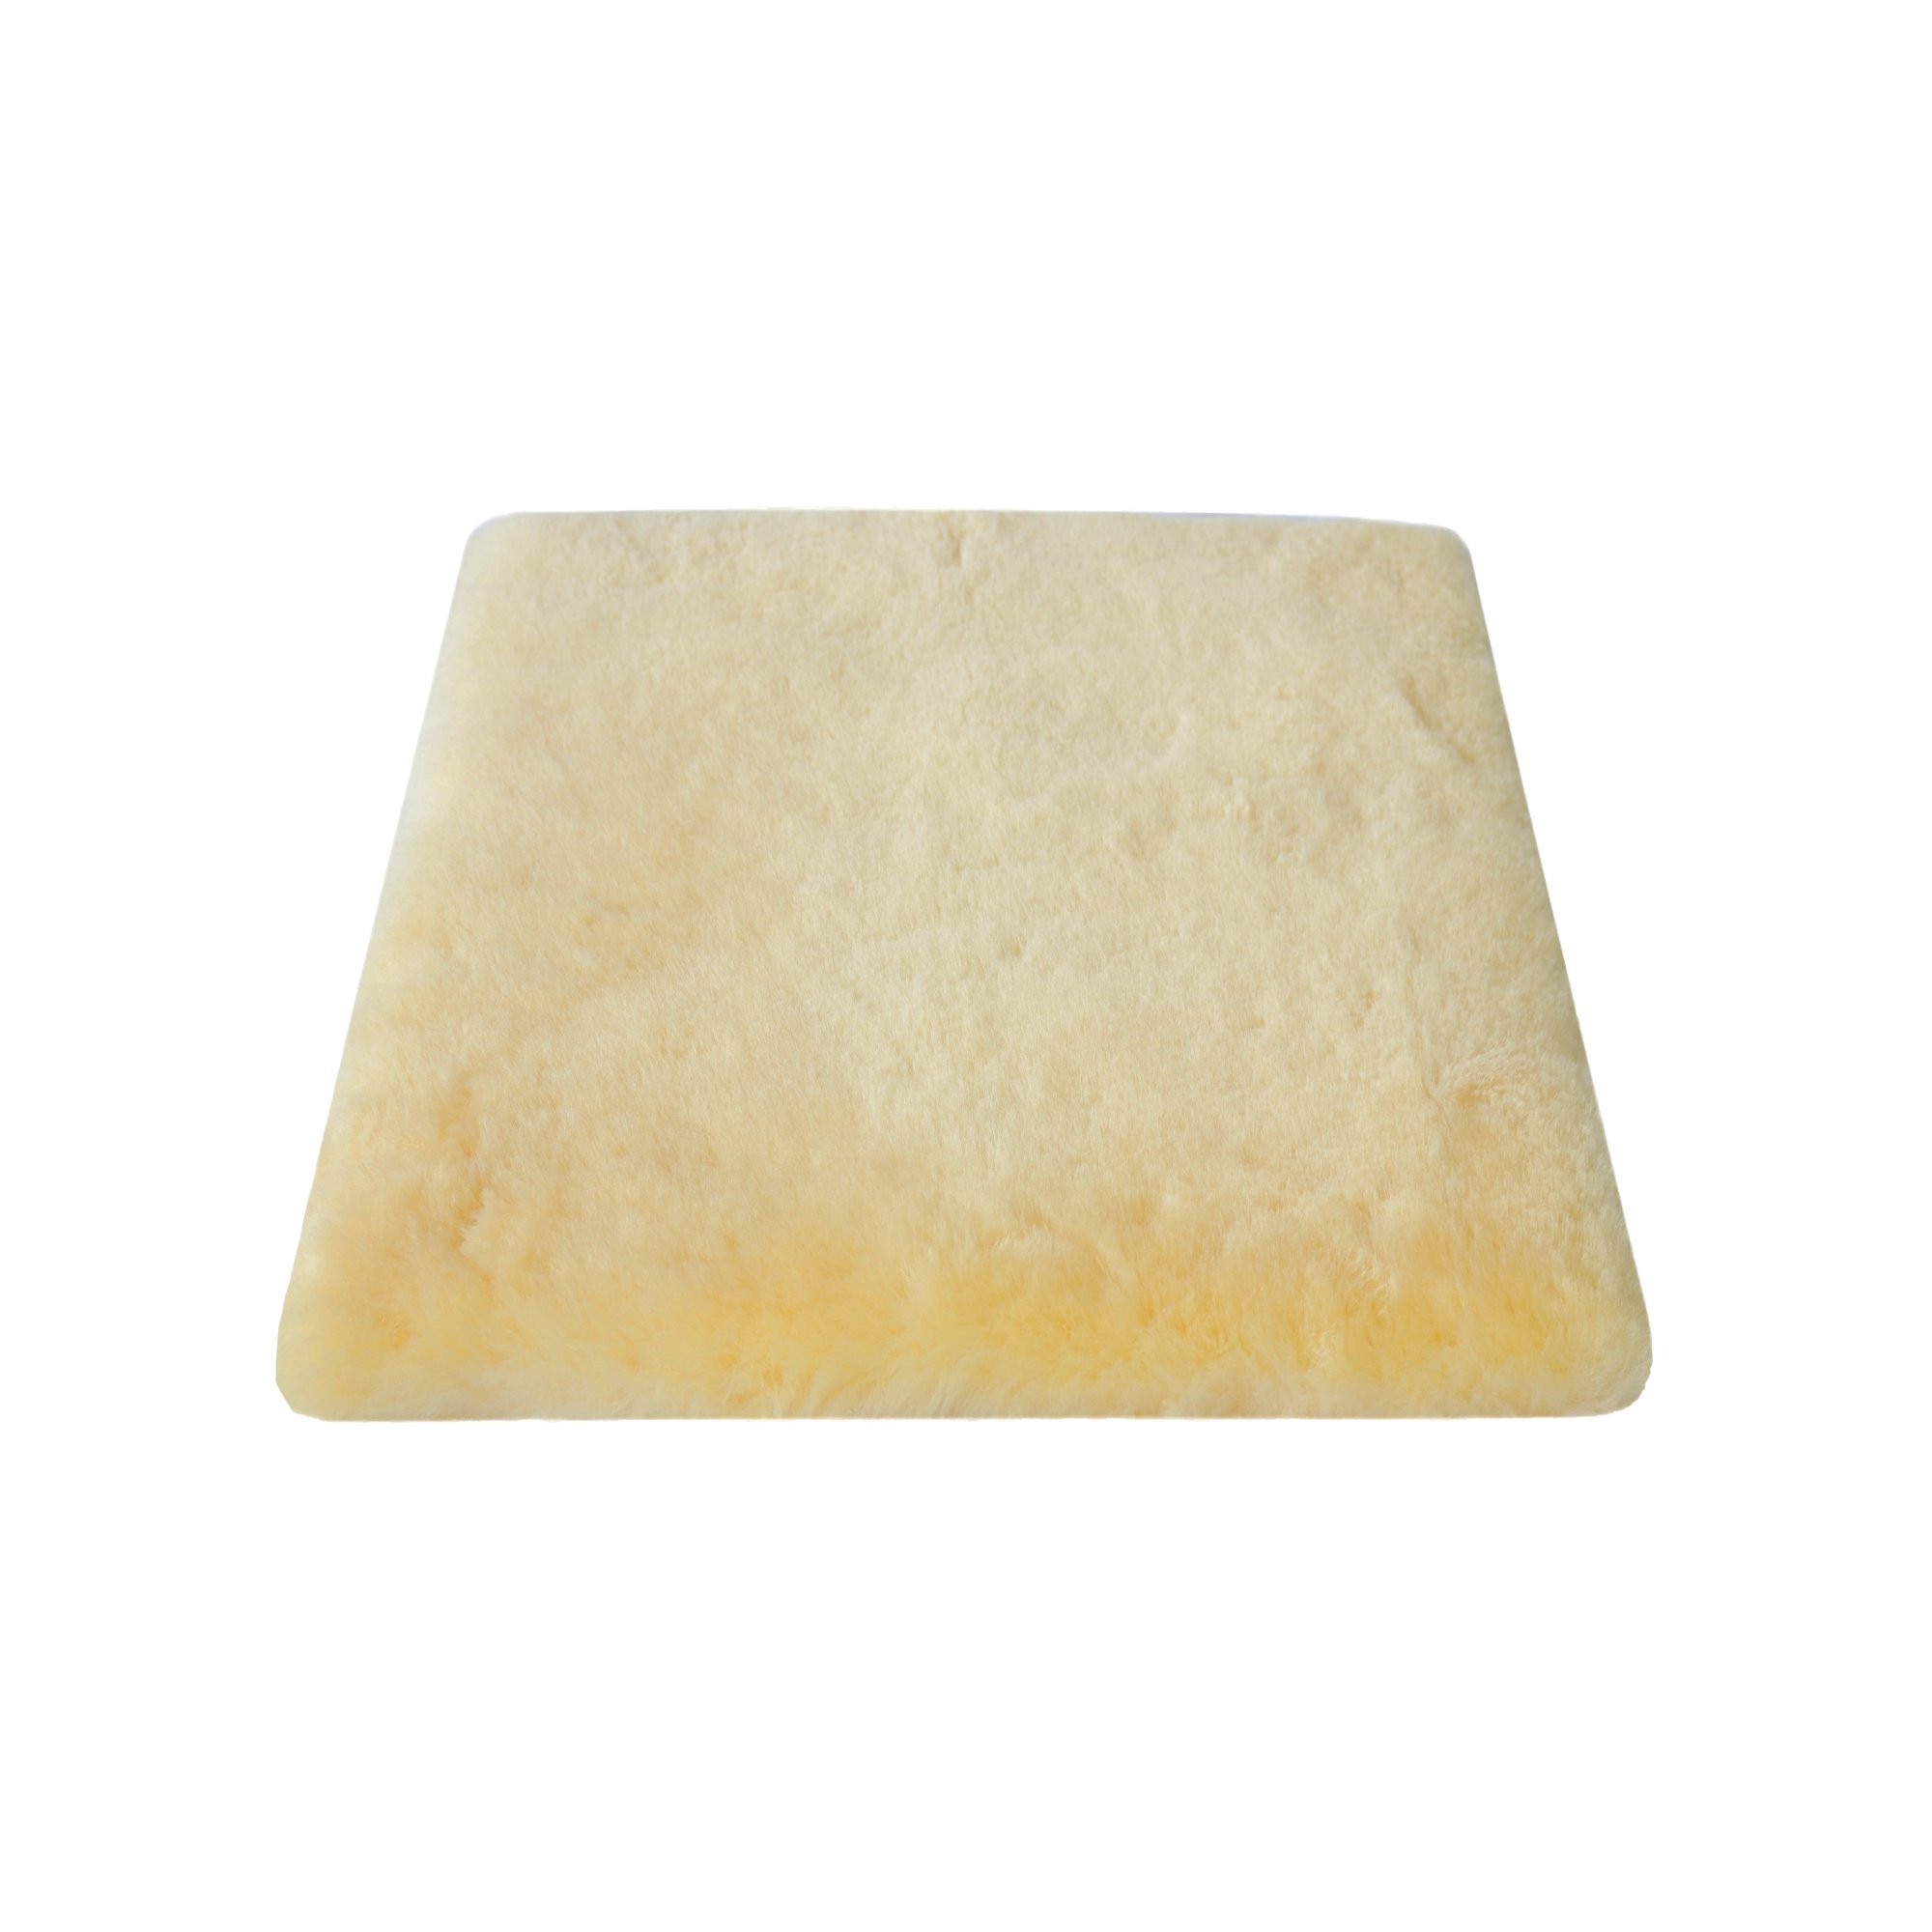 17" Square Natural Off-White Medical Grade Sheepskin Chair Pad